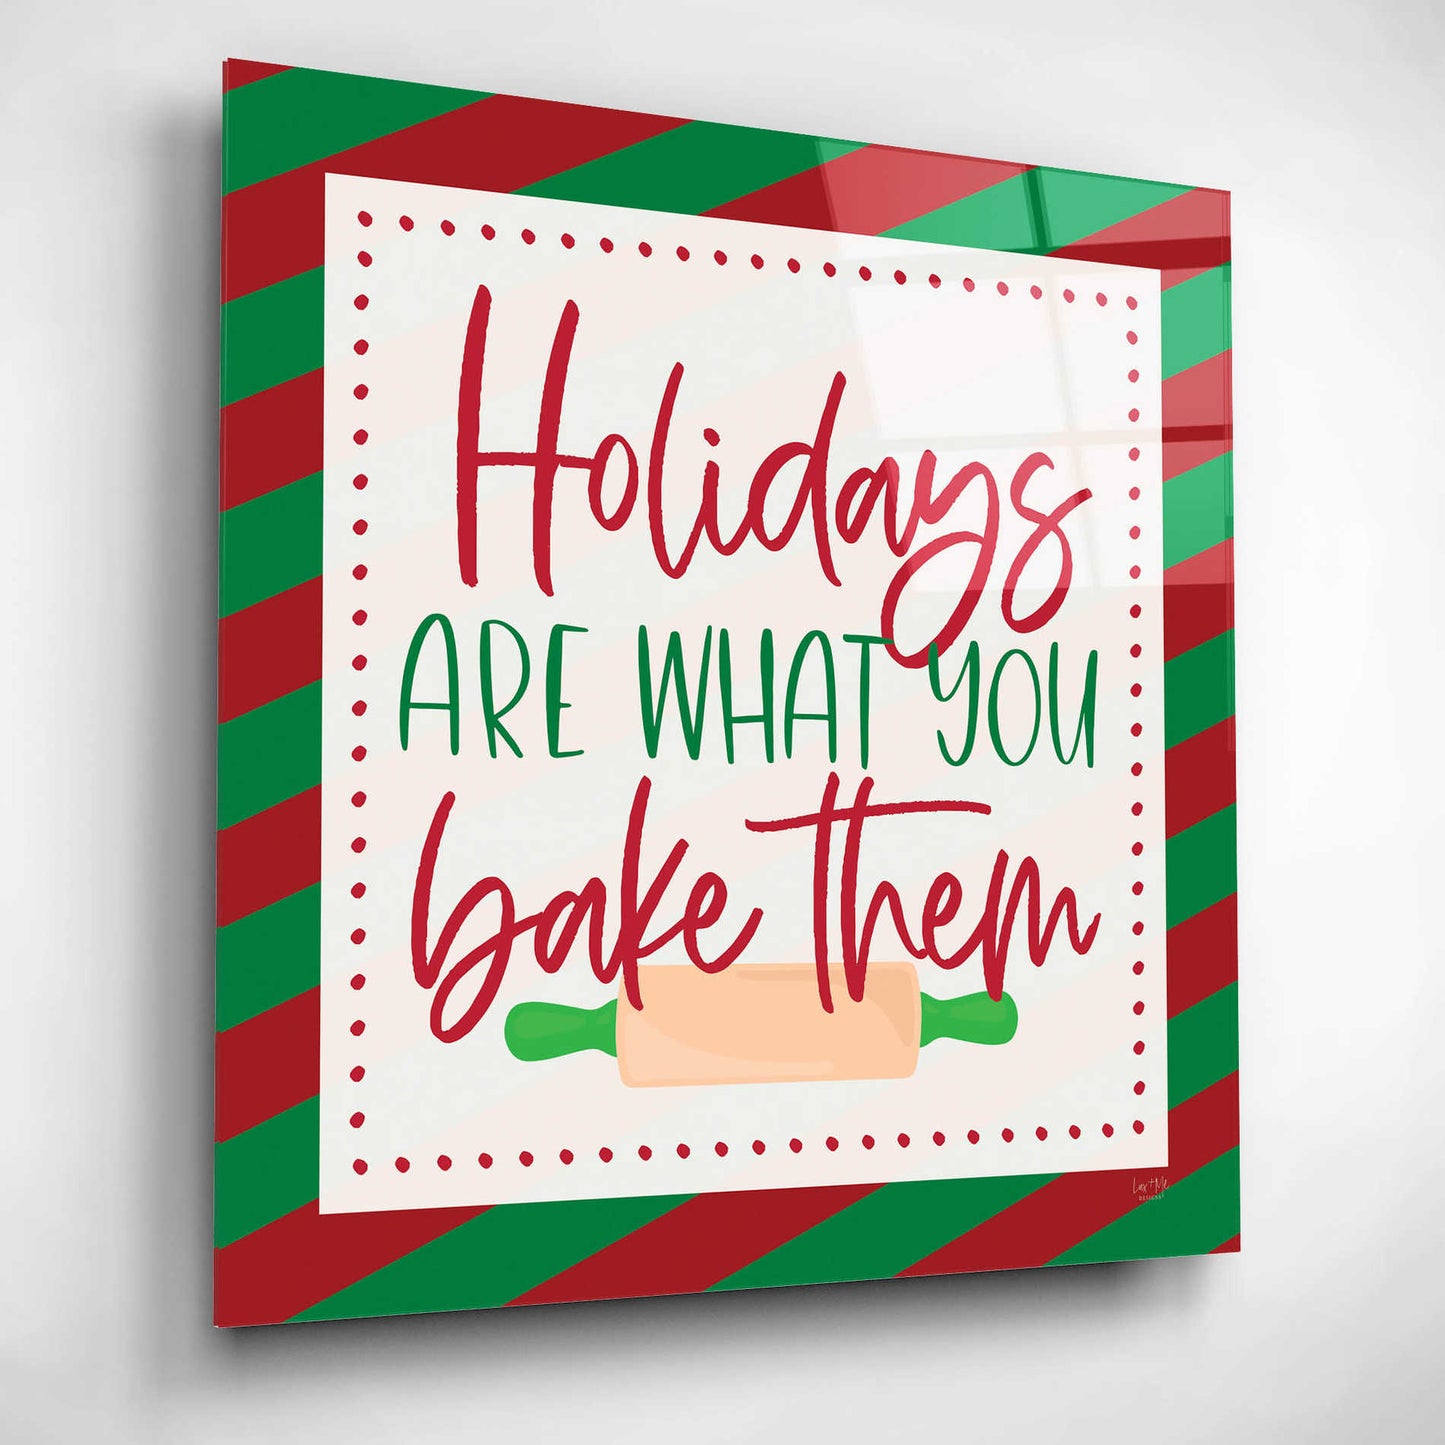 Epic Art 'Holidays are What You Bake Them' by Lux + Me, Acrylic Glass Wall Art,12x12